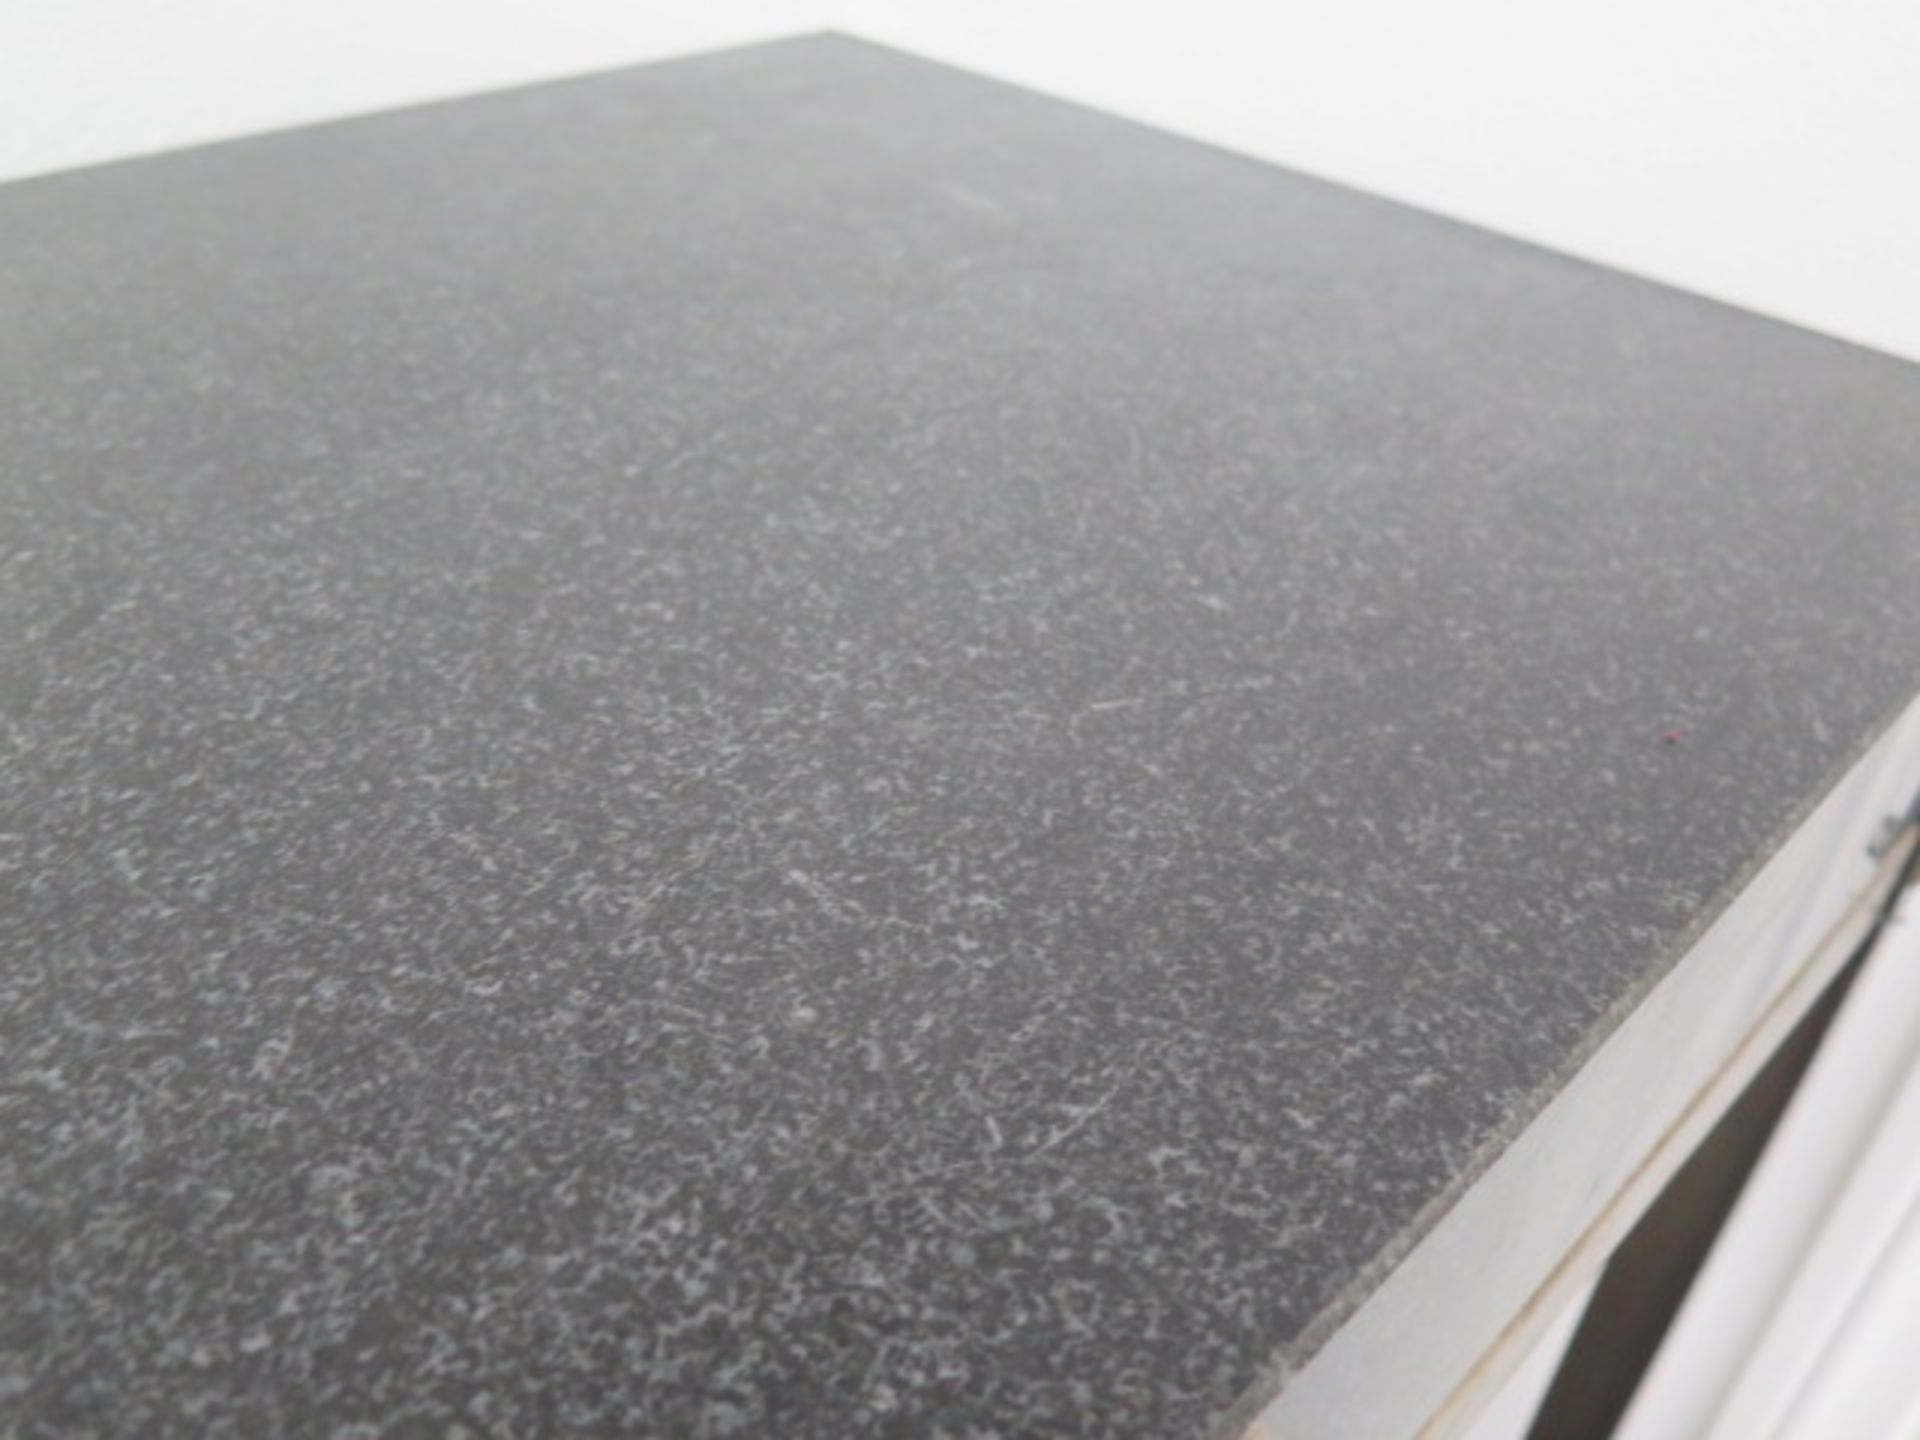 18" x 24" x 4" 2-Ledge Granite Surface Plate w/ Roll Stand (SOLD AS-IS - NO WARRANTY) - Image 3 of 4